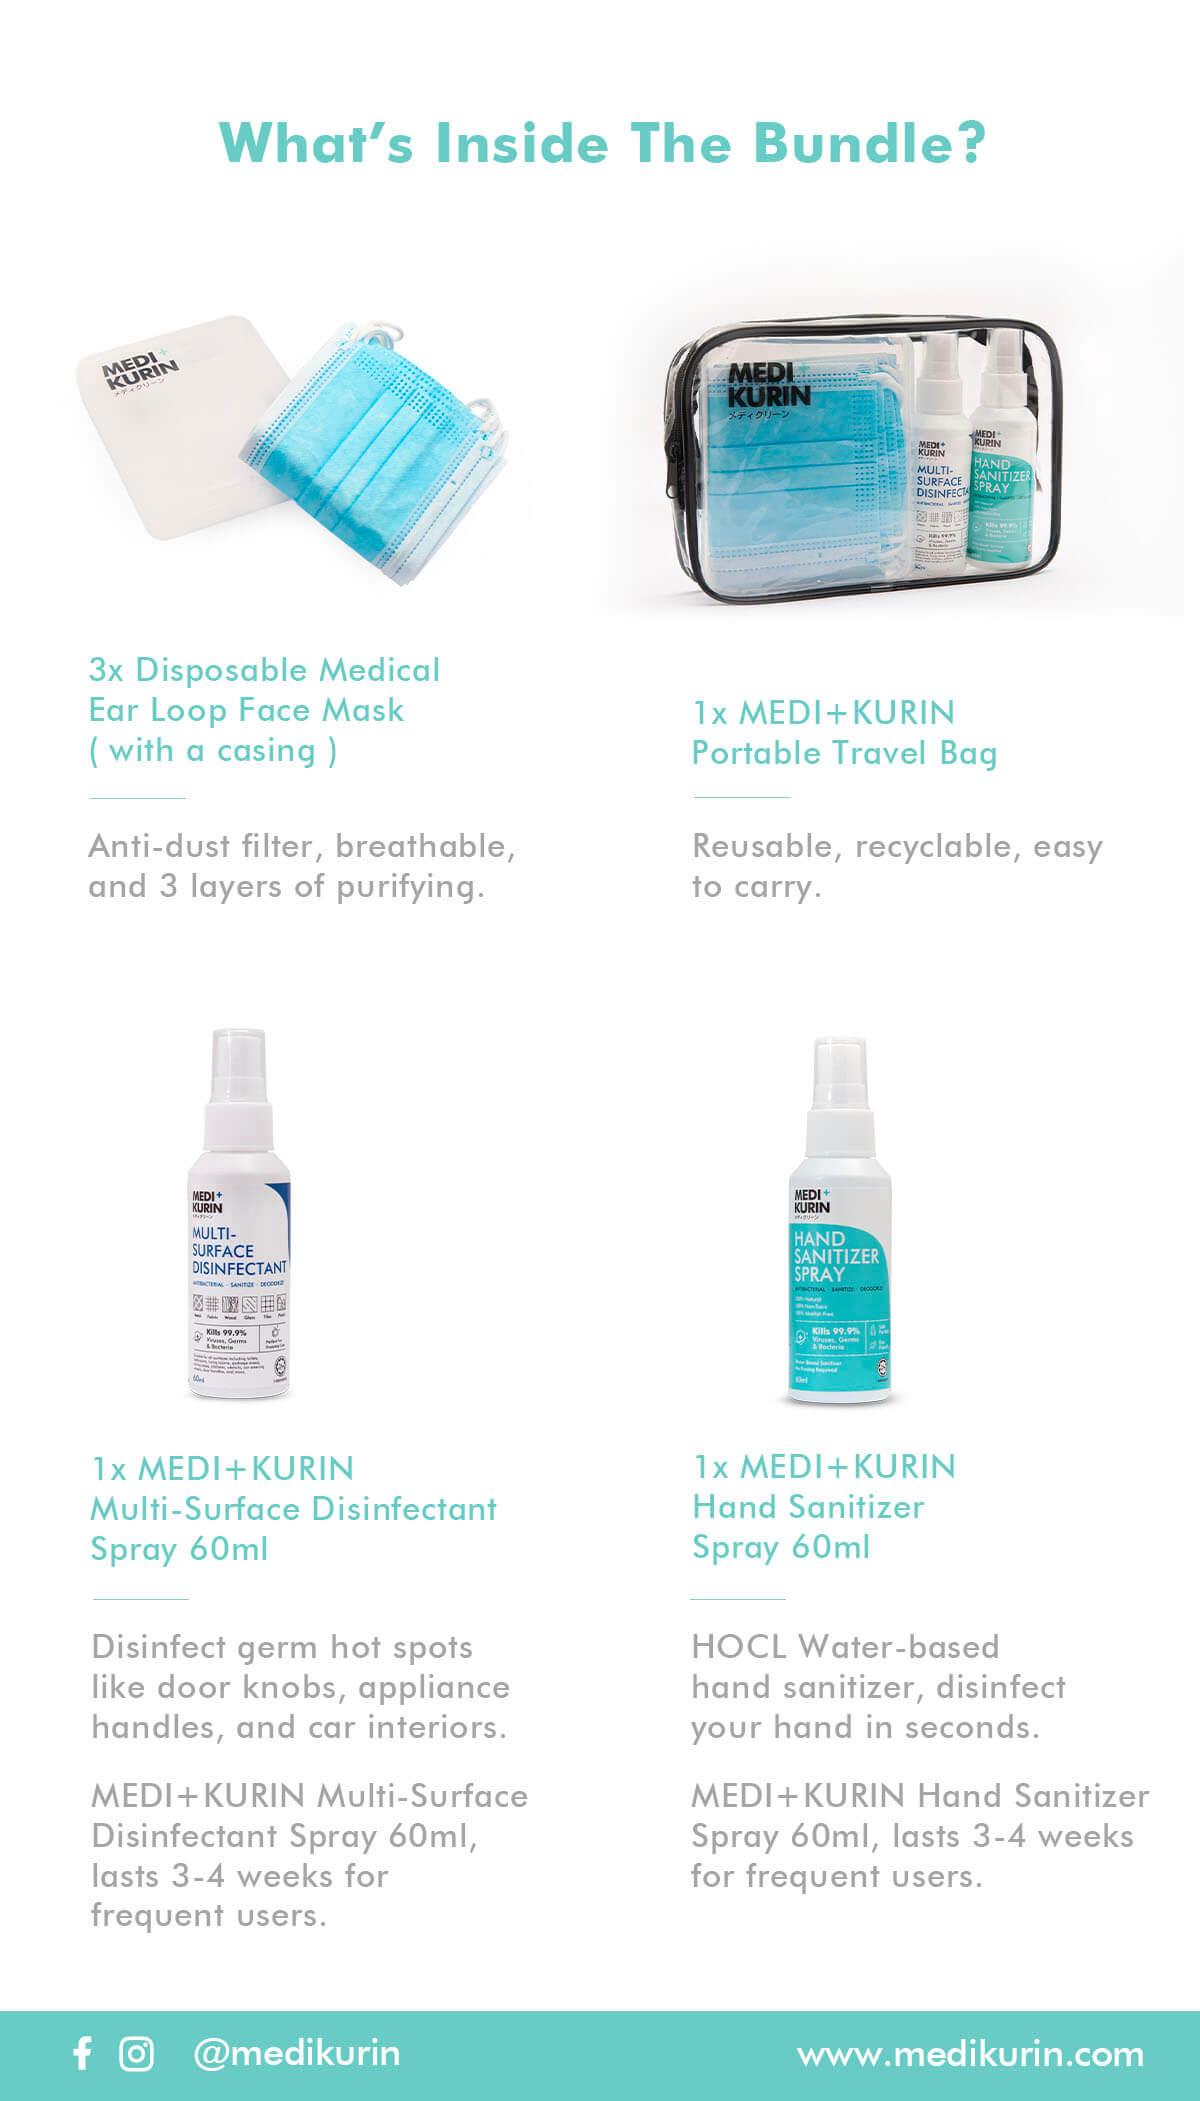 MEDI+KURIN HOCl Sanitizing Bundle Deal Is Suitable For Frequent Travellers